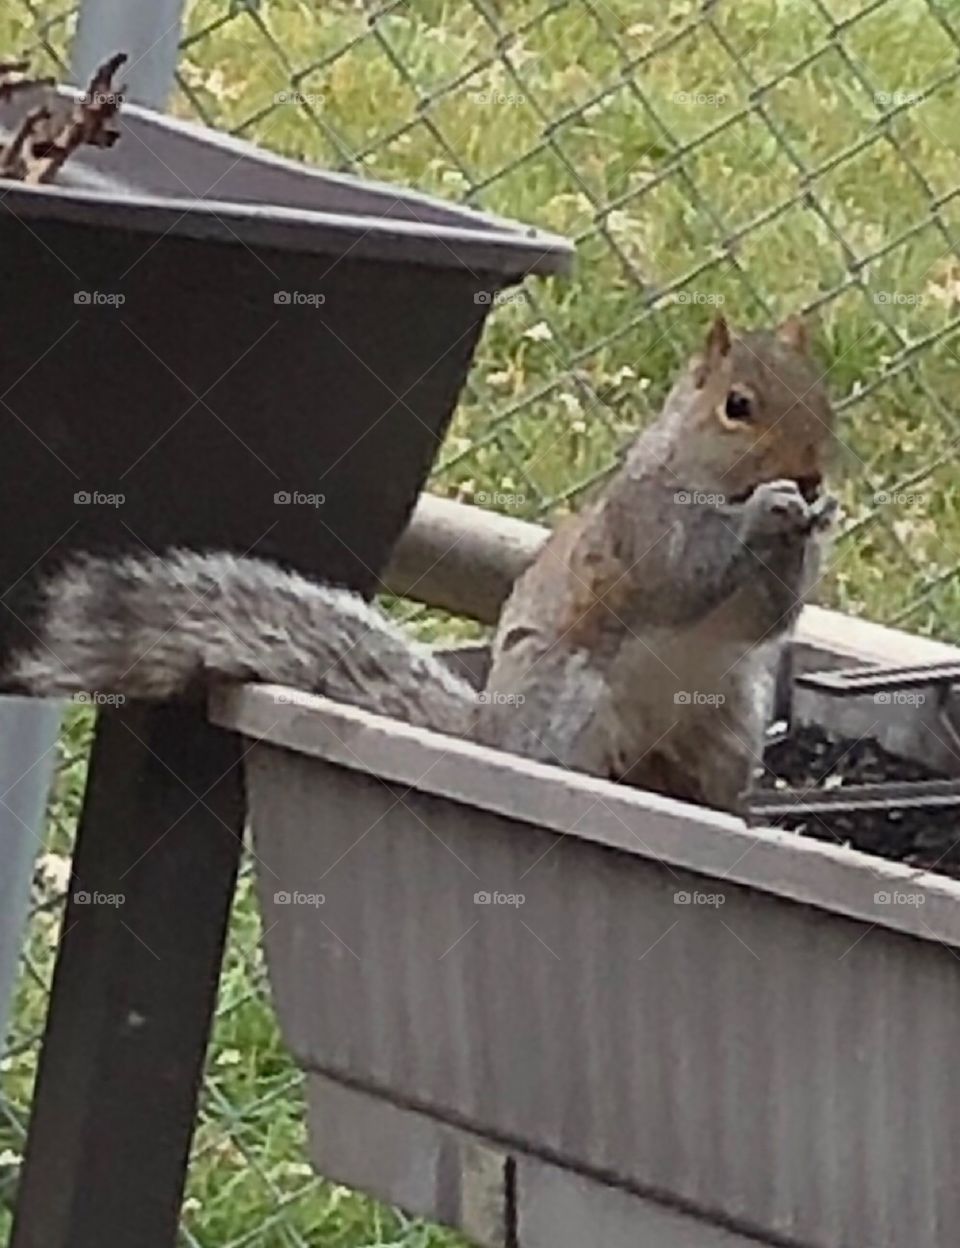 Squirrel eating in a flower box 